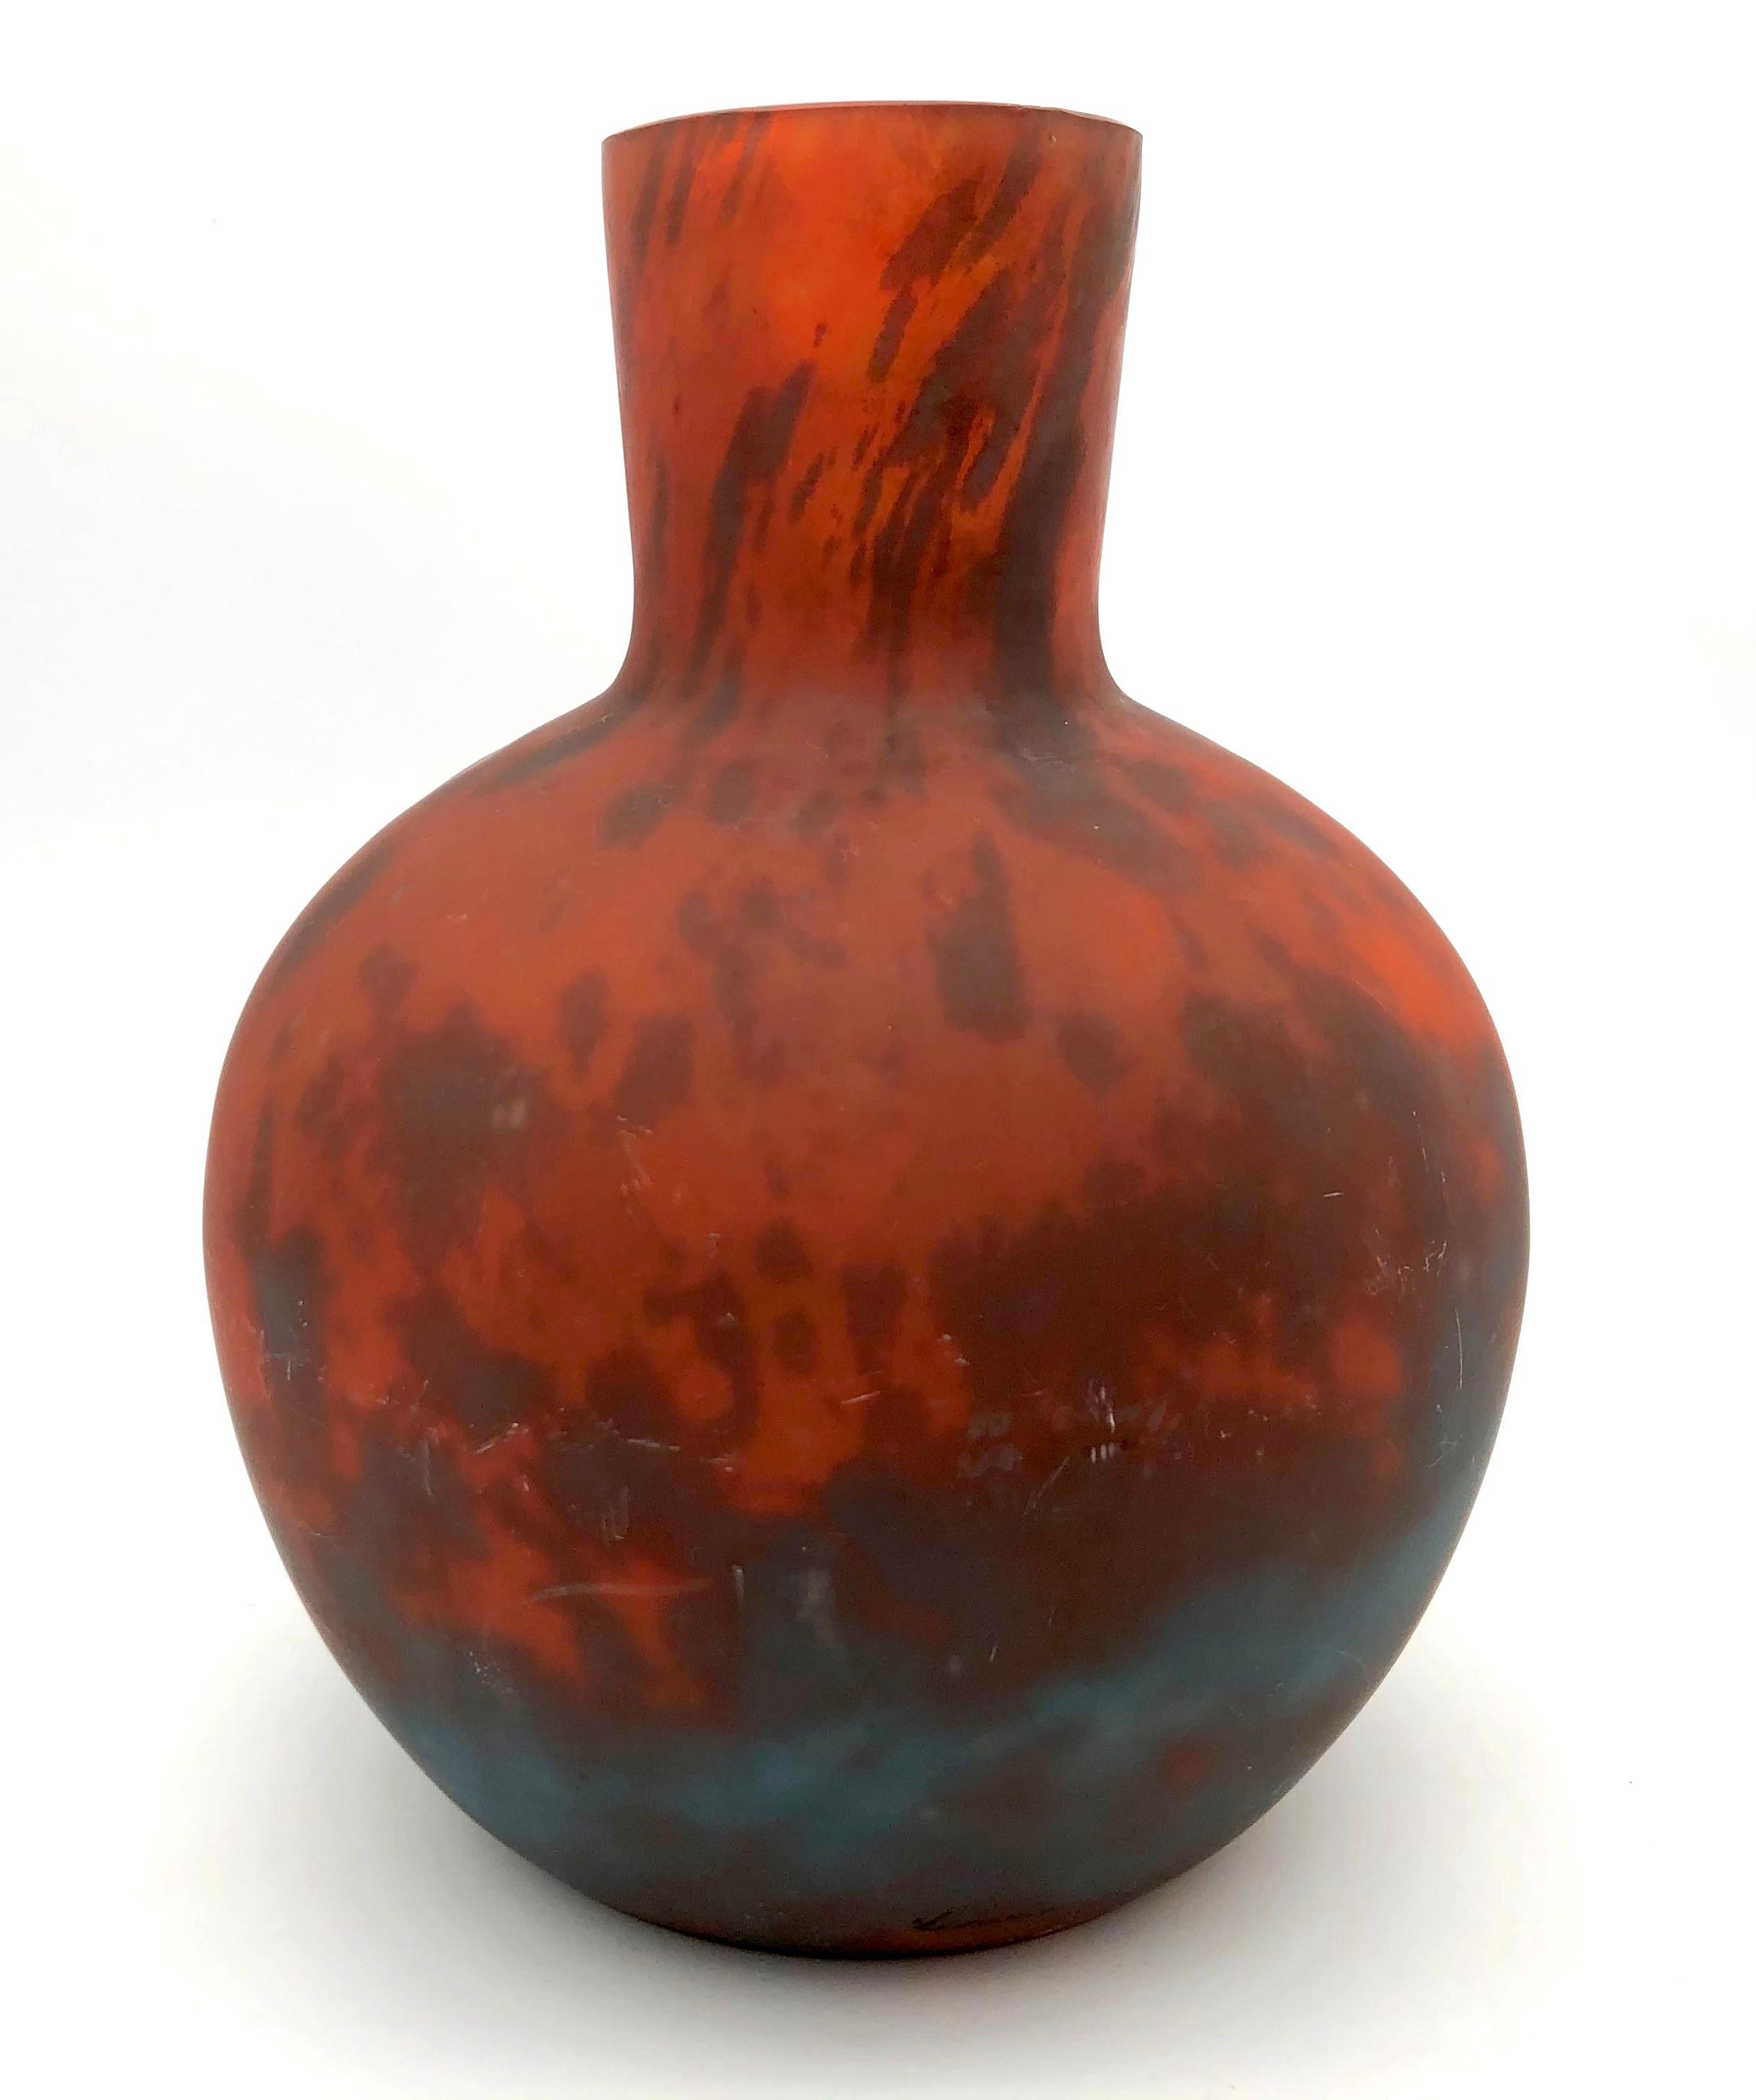 This wonderful glass vase in the hues of a sunset over the sea is signed Lorrain in script.